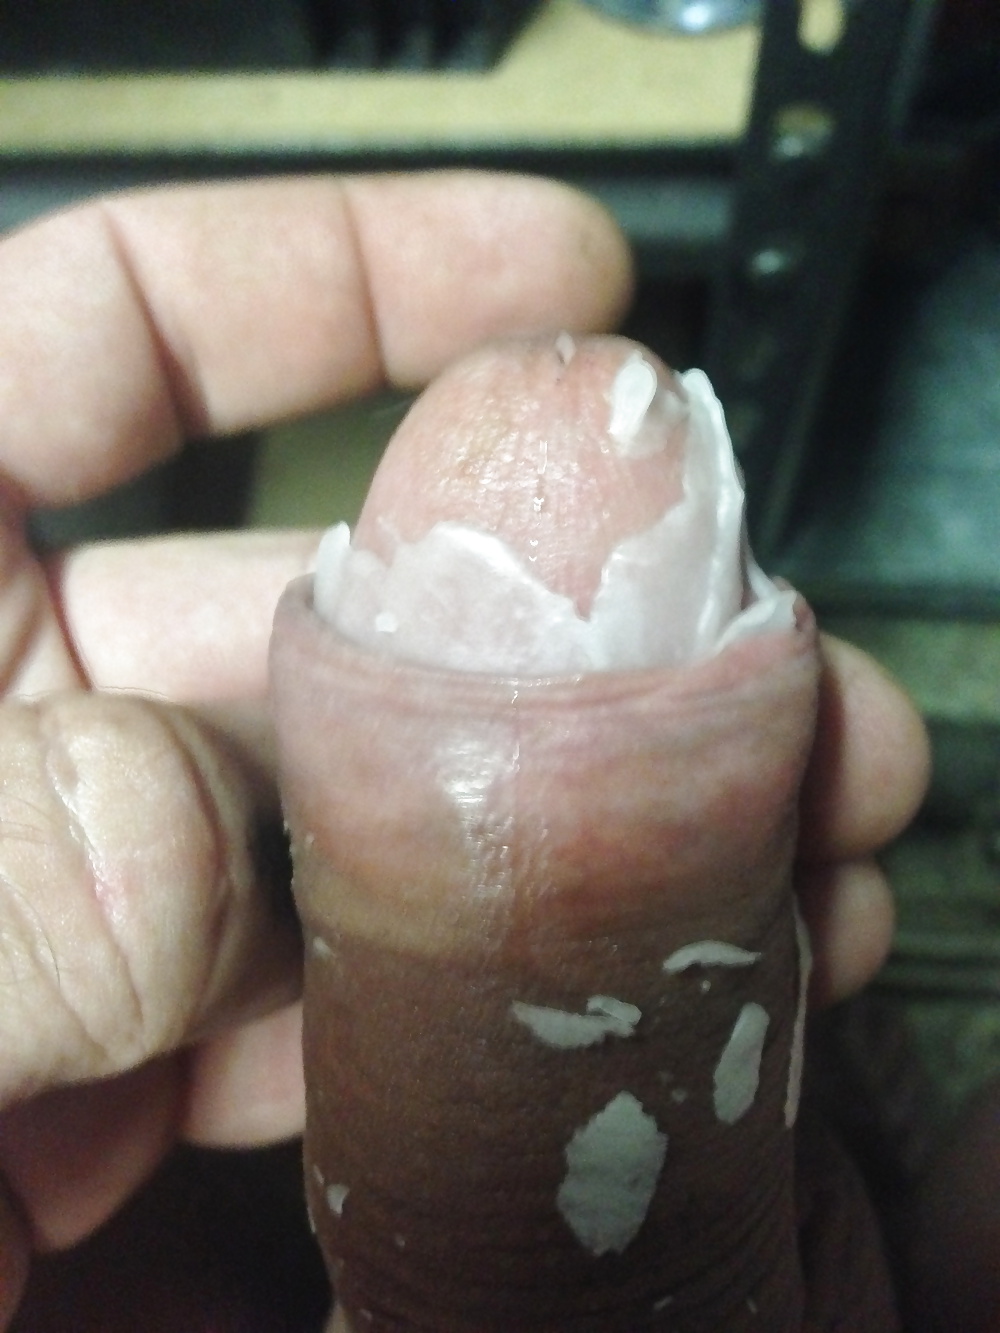 Pouring hot candle wax on my cock. #26653773